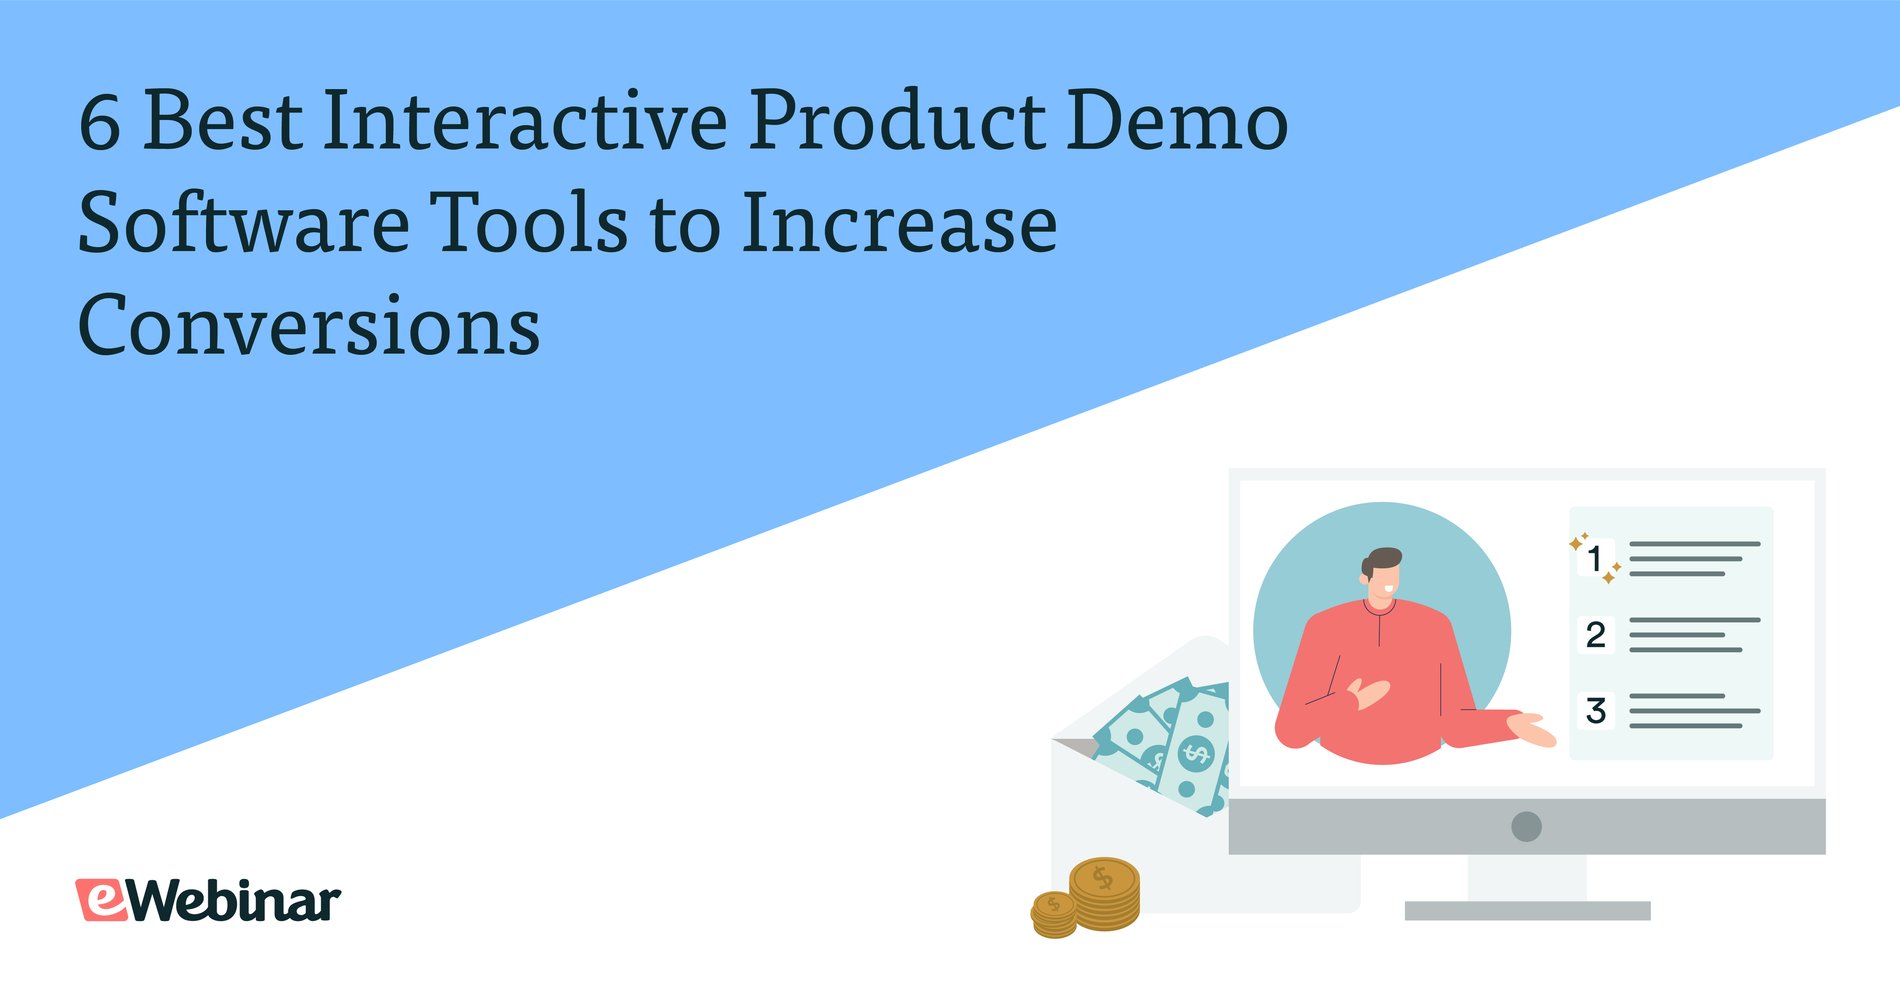 6 Best Interactive Product Demo Software Tools to Increase Conversions